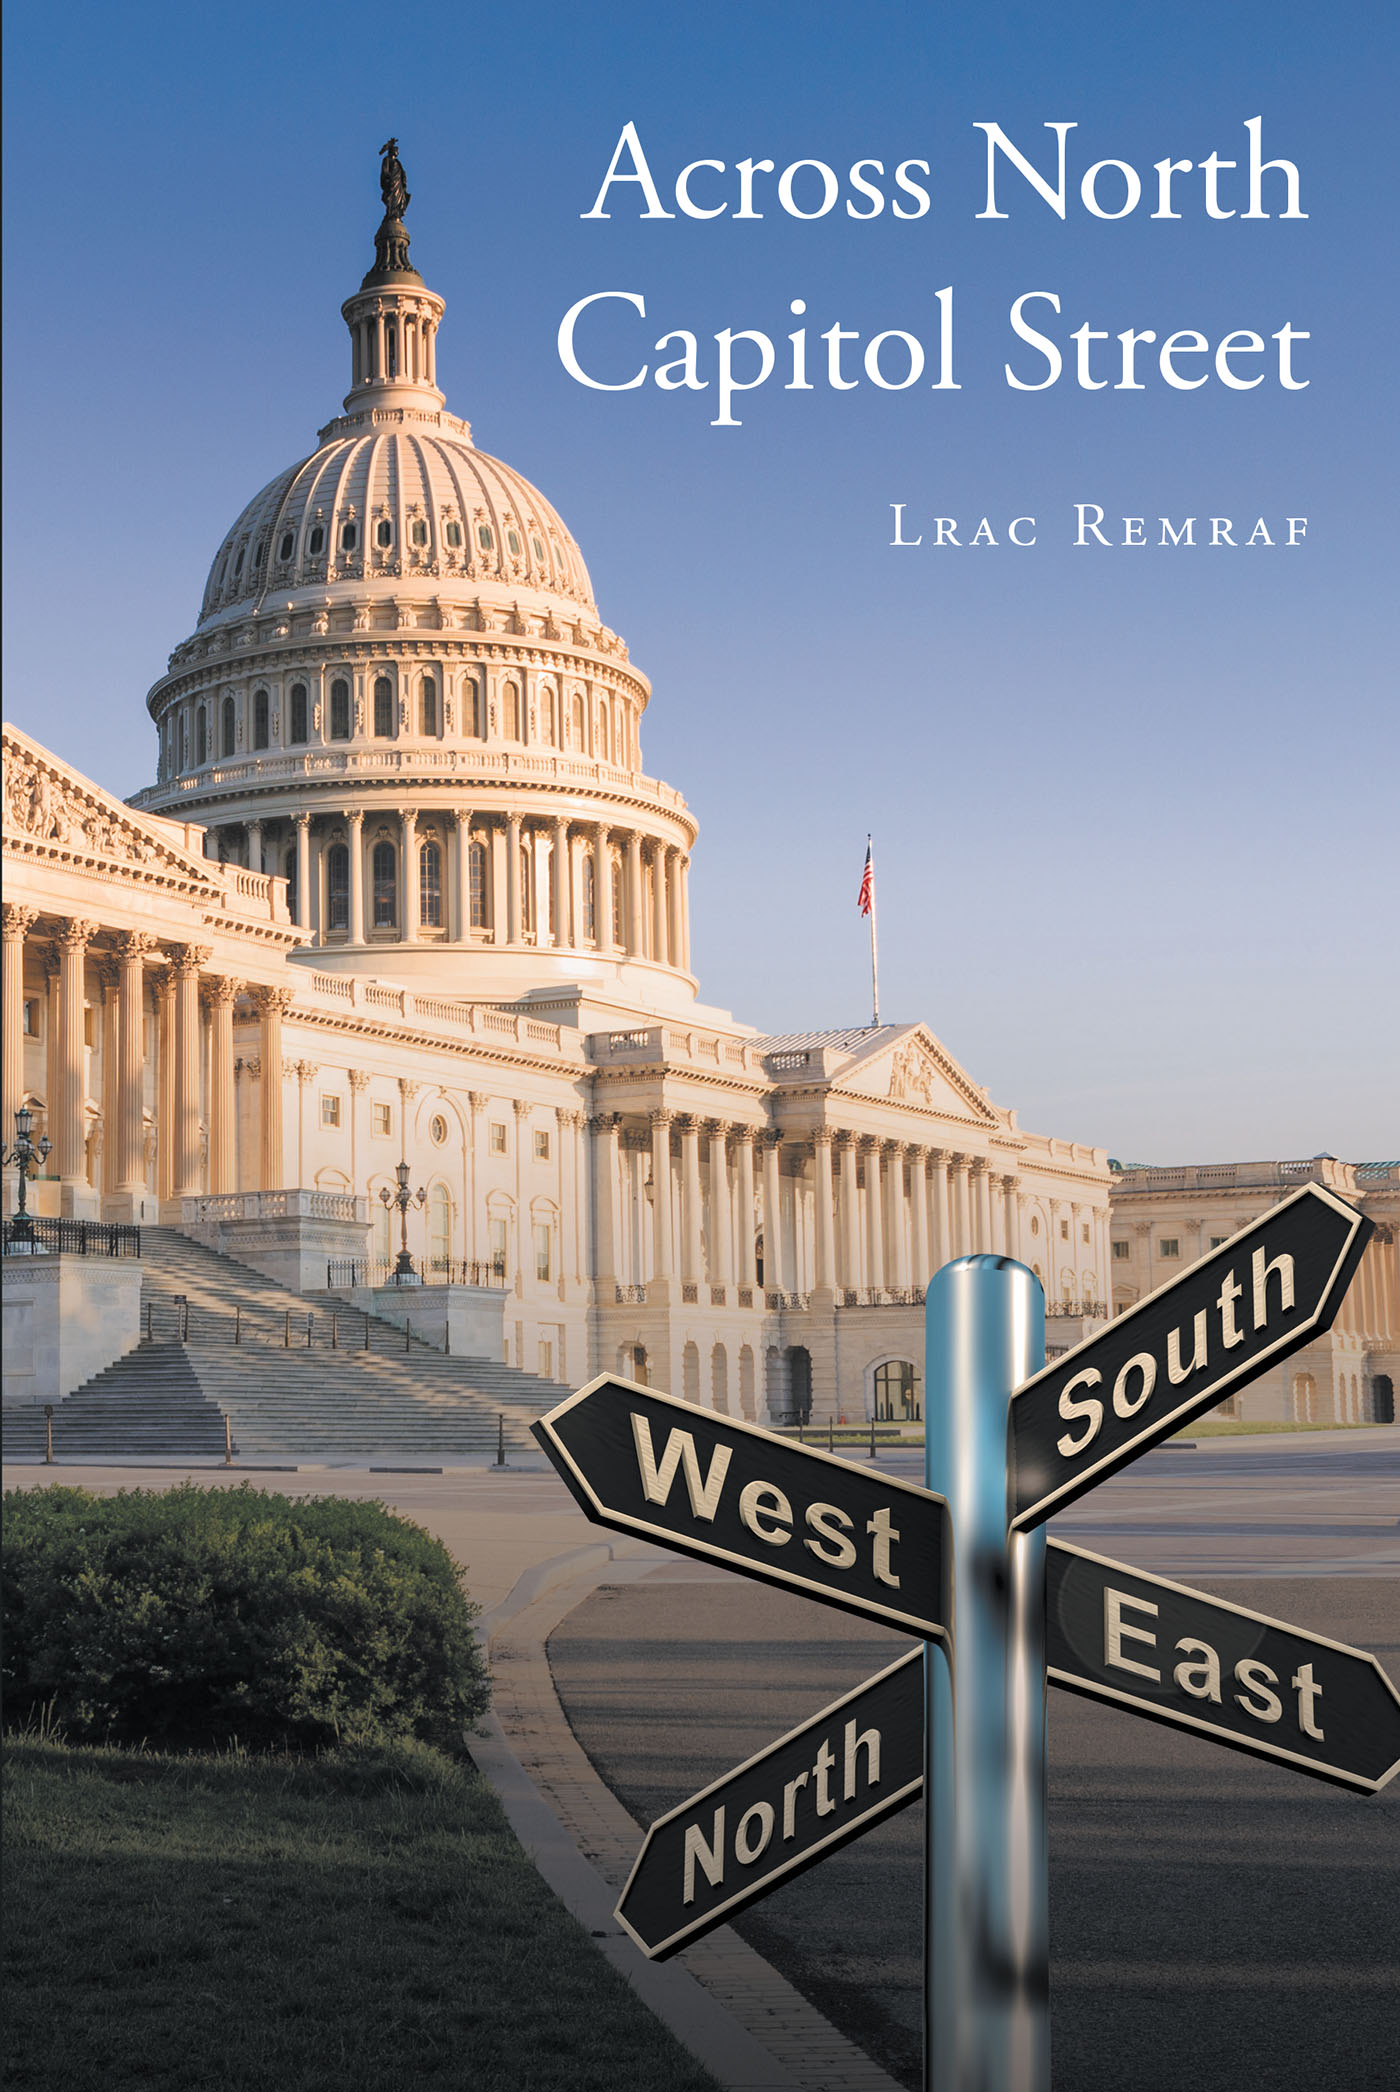 Author Lrac Remraf’s New Book, "North Capitol Street," is a Riveting Young Adult Fiction Novel That Takes Readers to North Carolina to Meet Jacob, Who Lives on a Farm